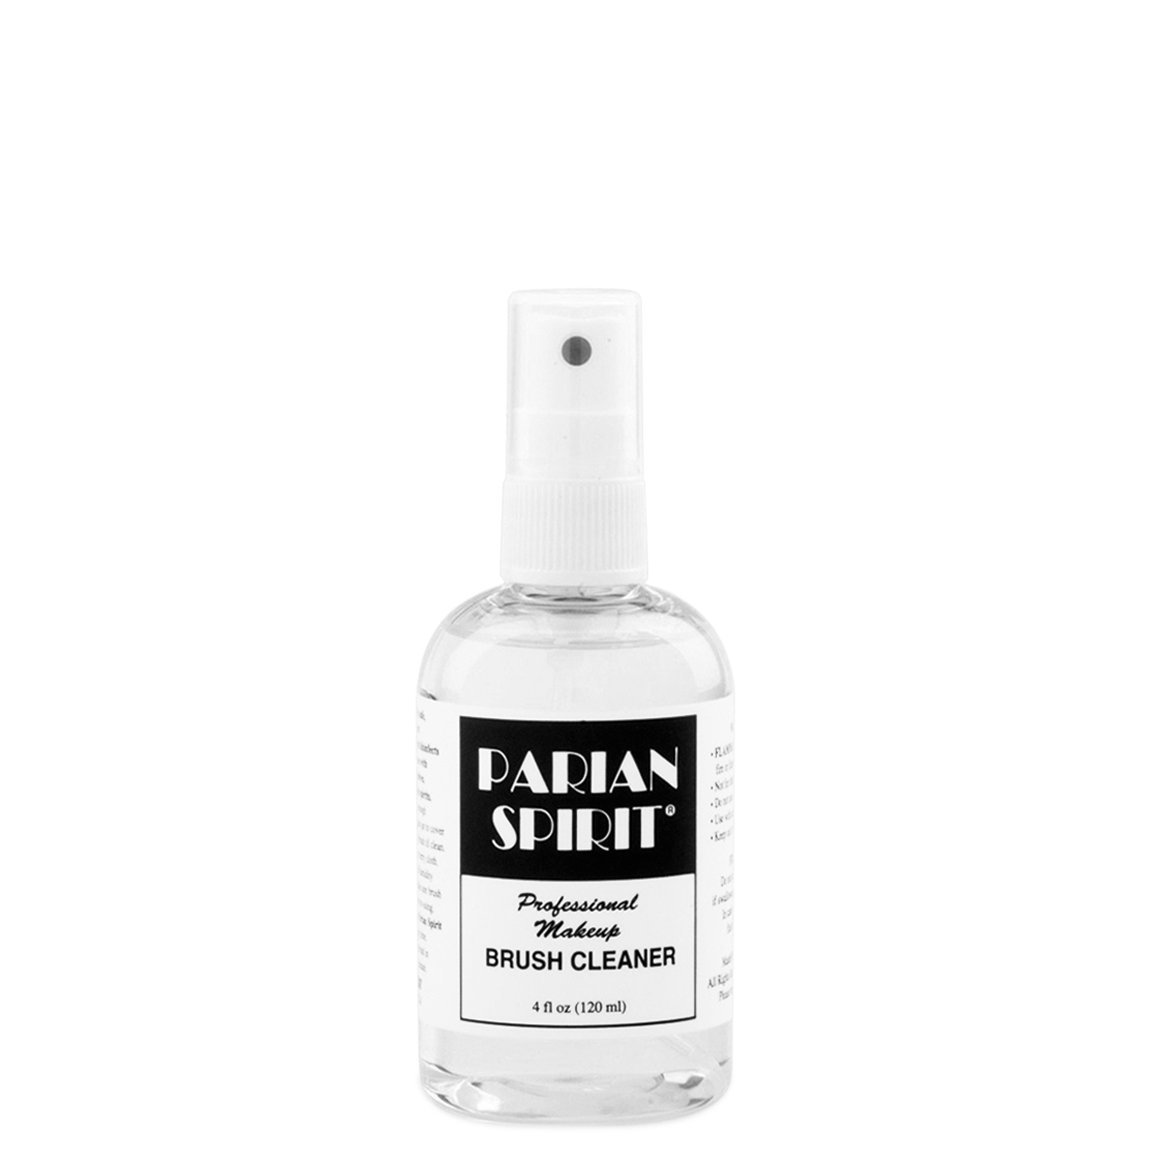 Parian Spirit Professional Makeup Brush Cleaner 4 oz alternative view 1 - product swatch.